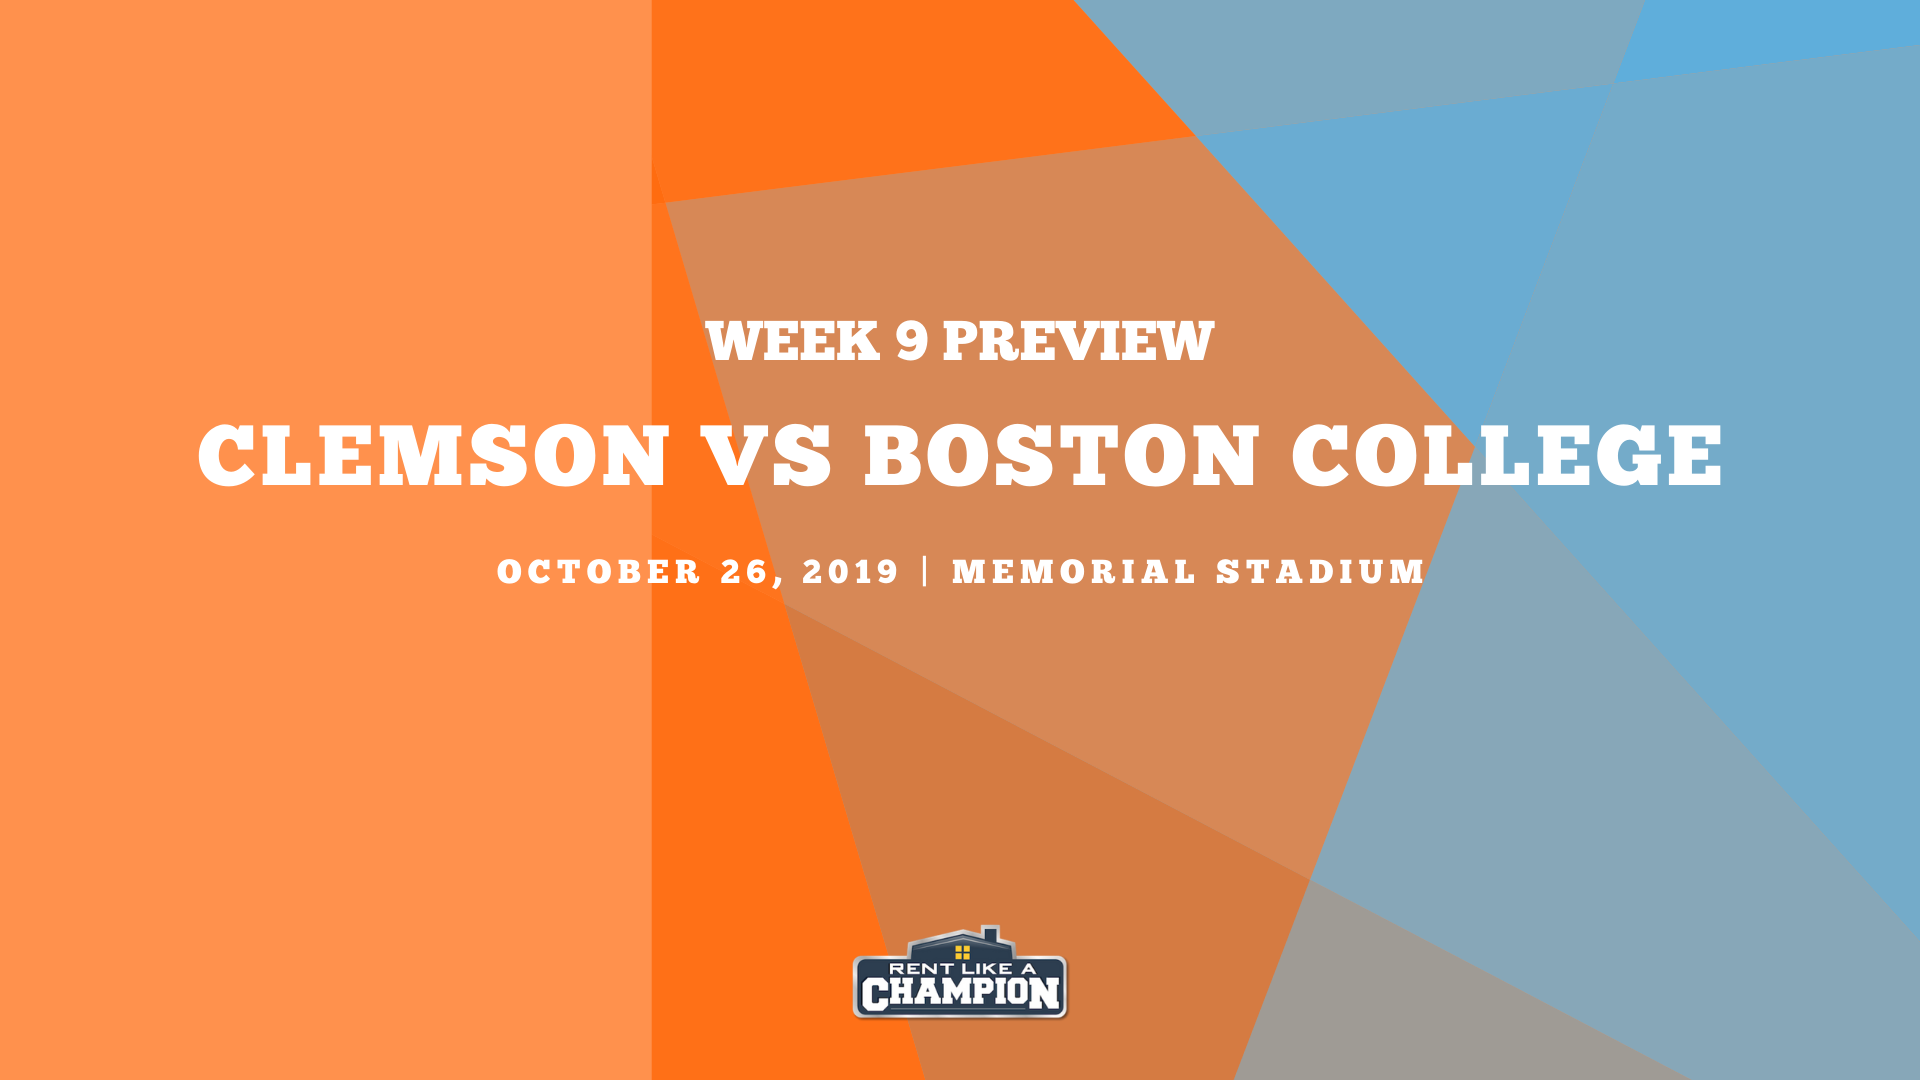 Clemson Game Preview Template (2)